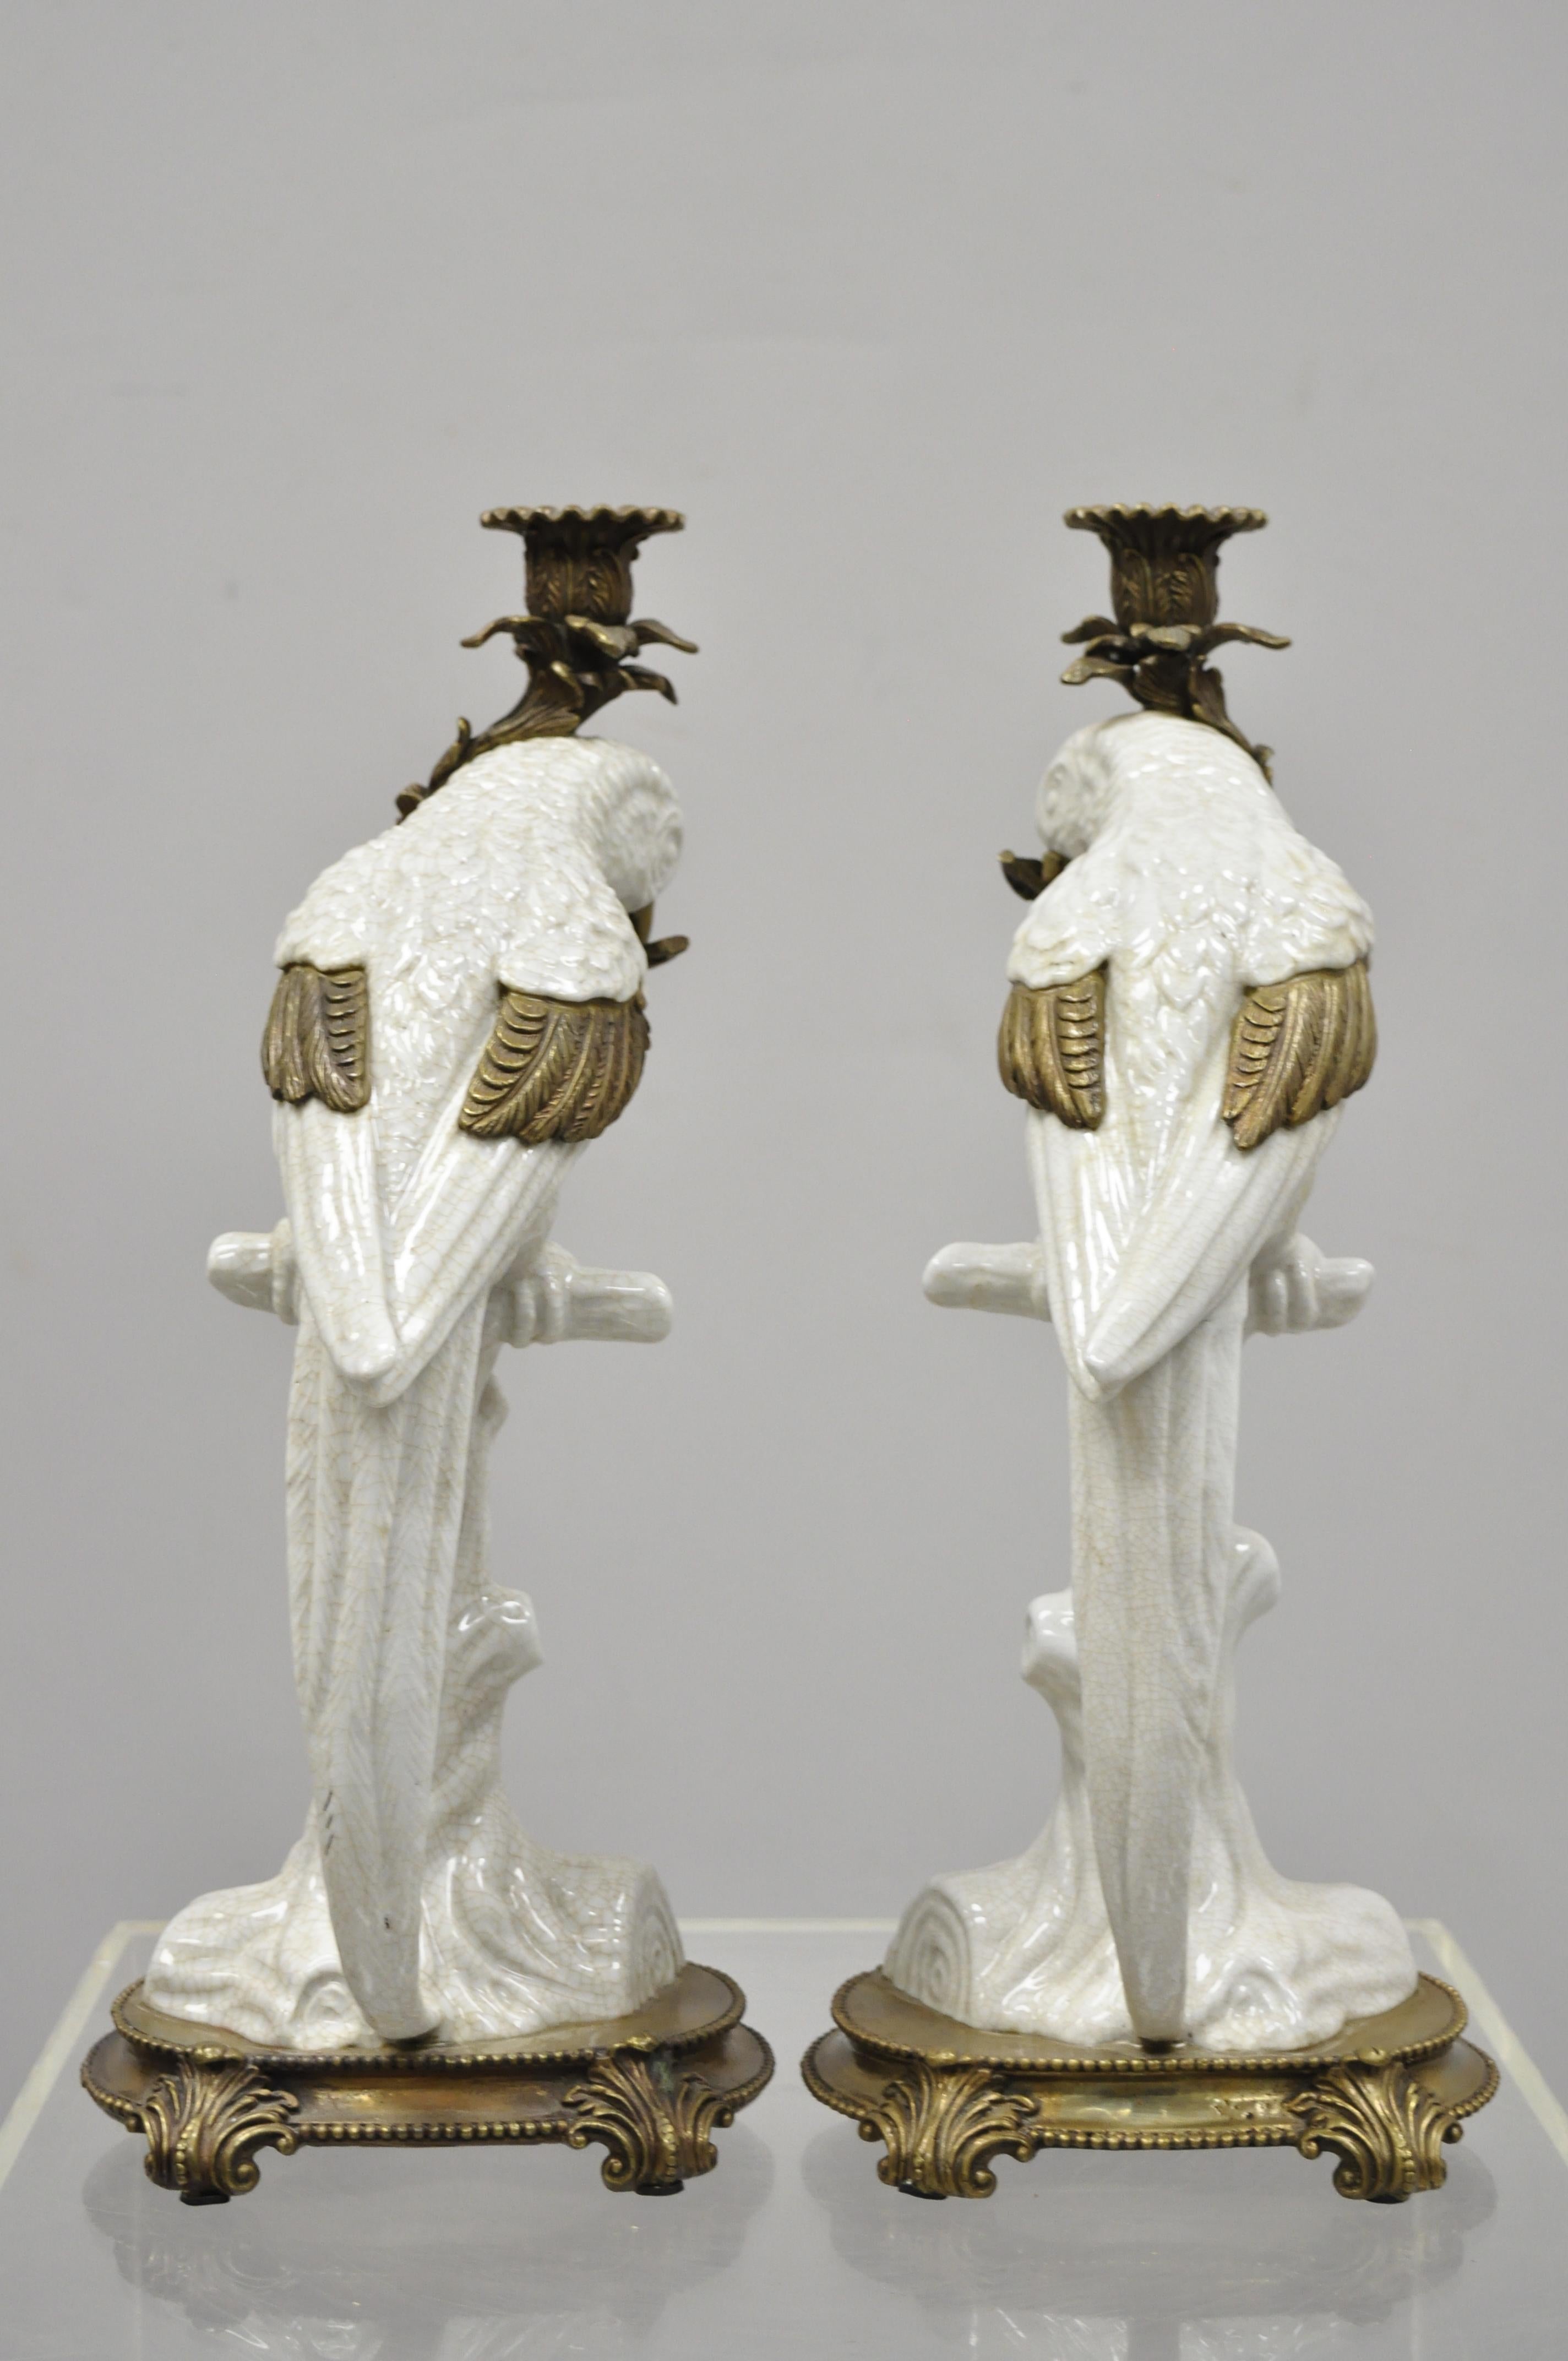 20th Century Pair of Porcelain & Bronze French Style White Parrot Candlestick Candle Holders